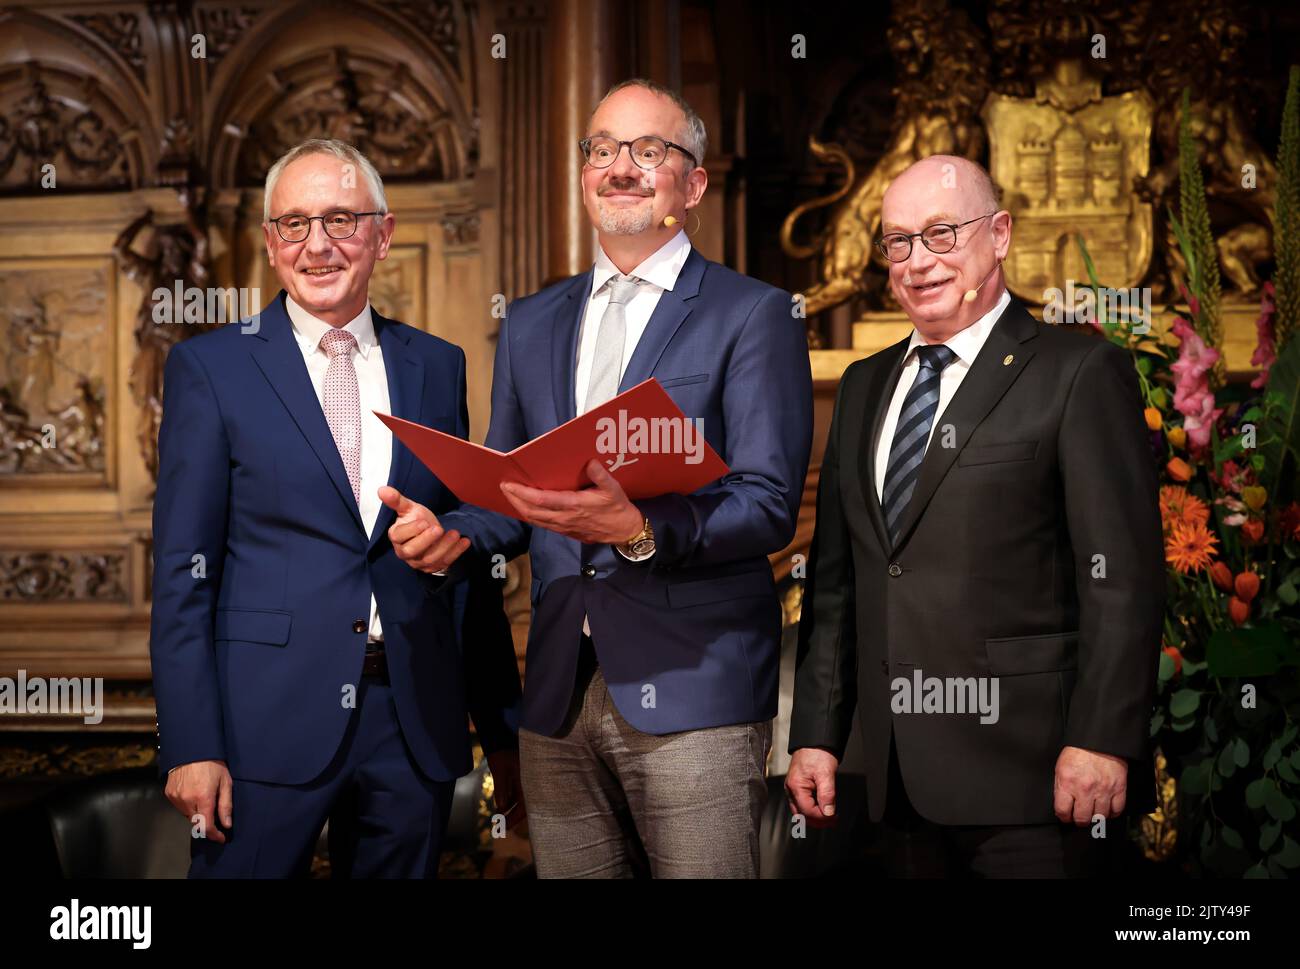 02 September 2022, Hamburg: Anthony Hyman (m), British cell biologist,  stands with his award between Lothar Dittmer (l), Chairman of the Executive  Board of the Körber Foundation, and Martin Stratmann, President of